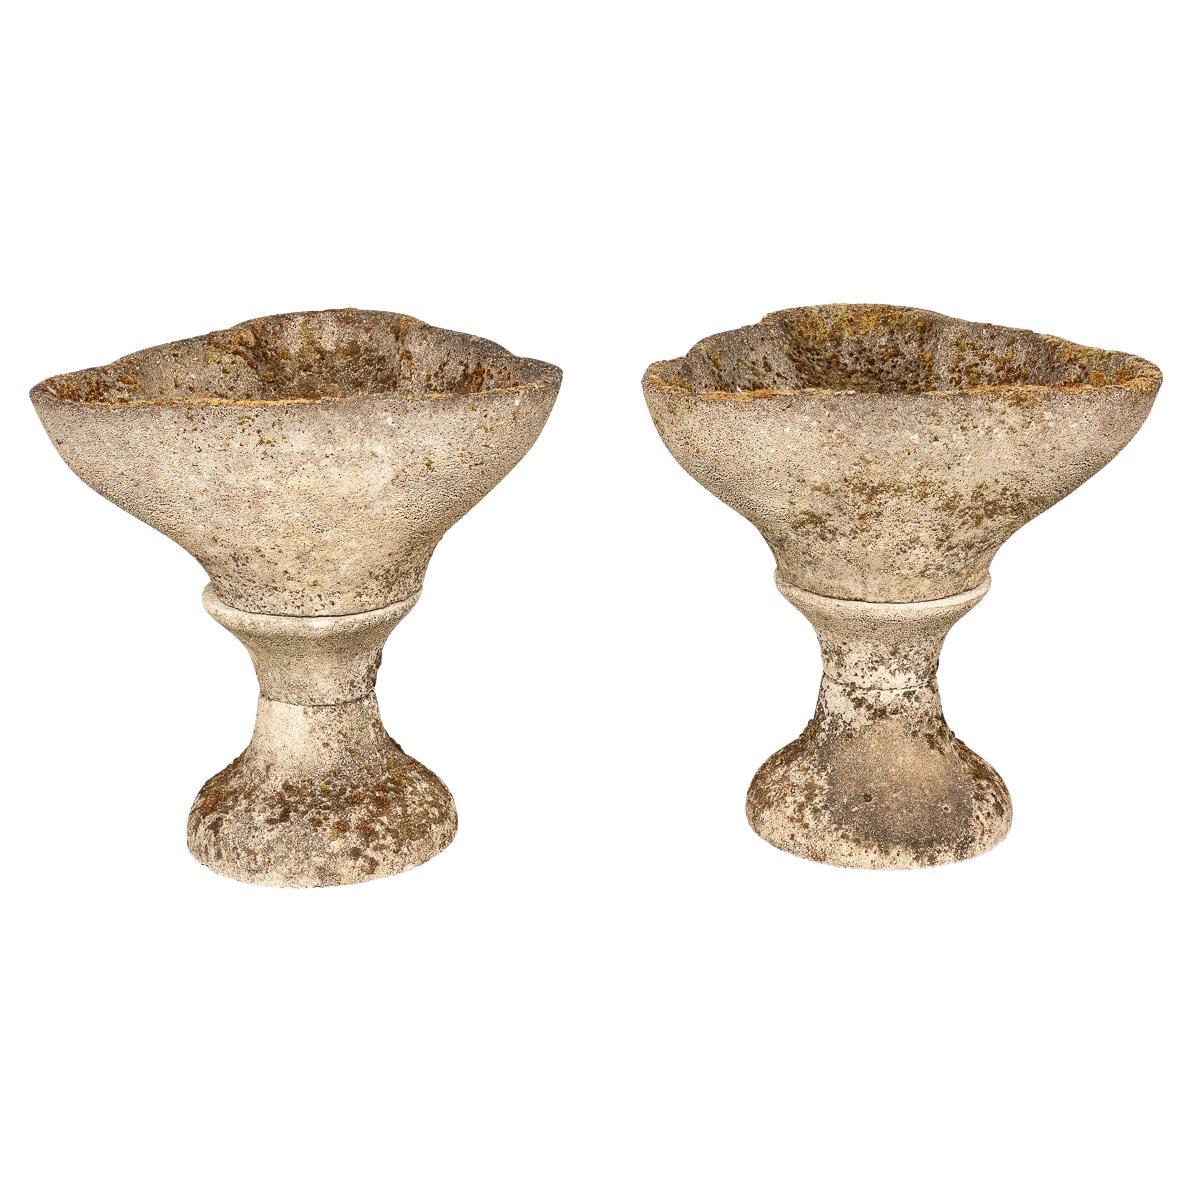 Pair of English Scalloped Stone Garden Urns, c. 1960s For Sale